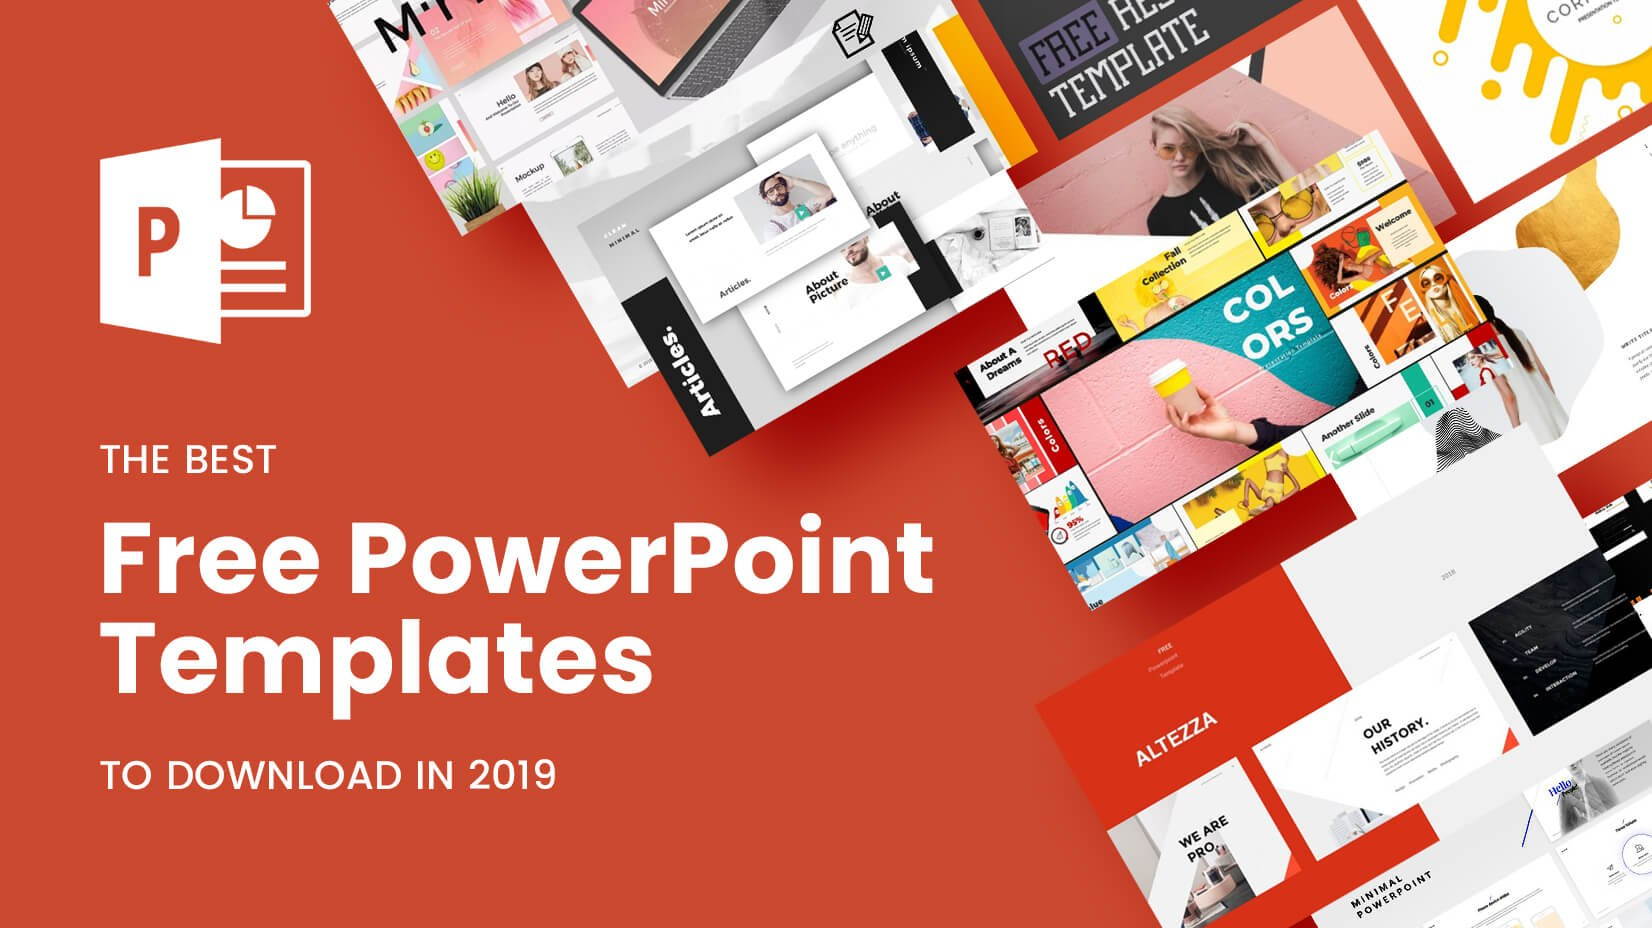 The Best Free Powerpoint Templates To Download In   Graphicmama in Webinar Powerpoint Templates